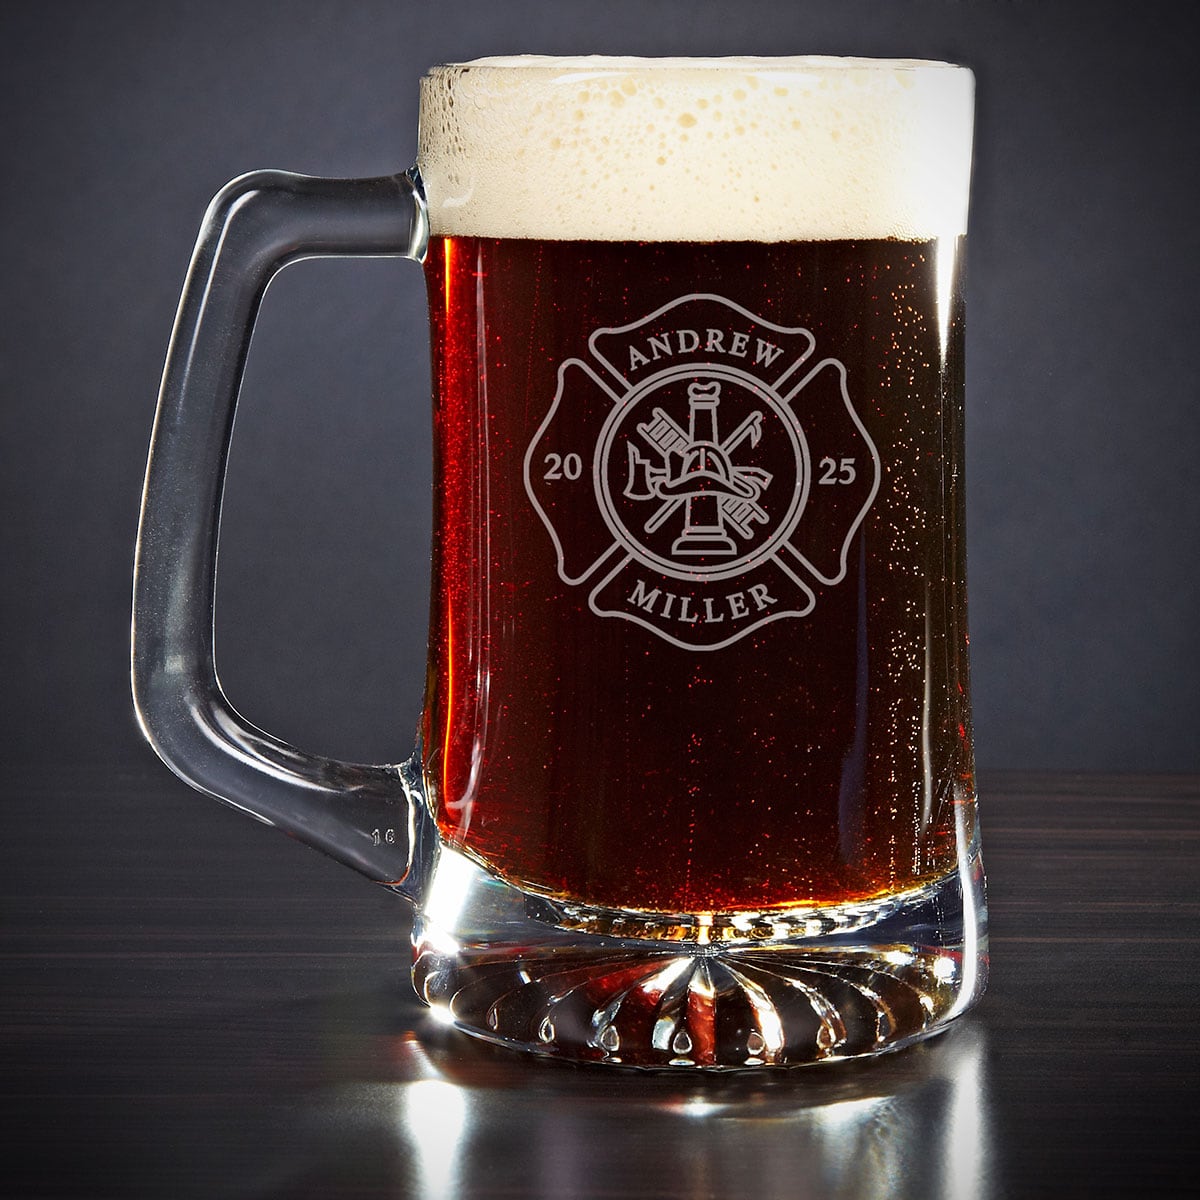 Firefighter Personalized Beer Mug